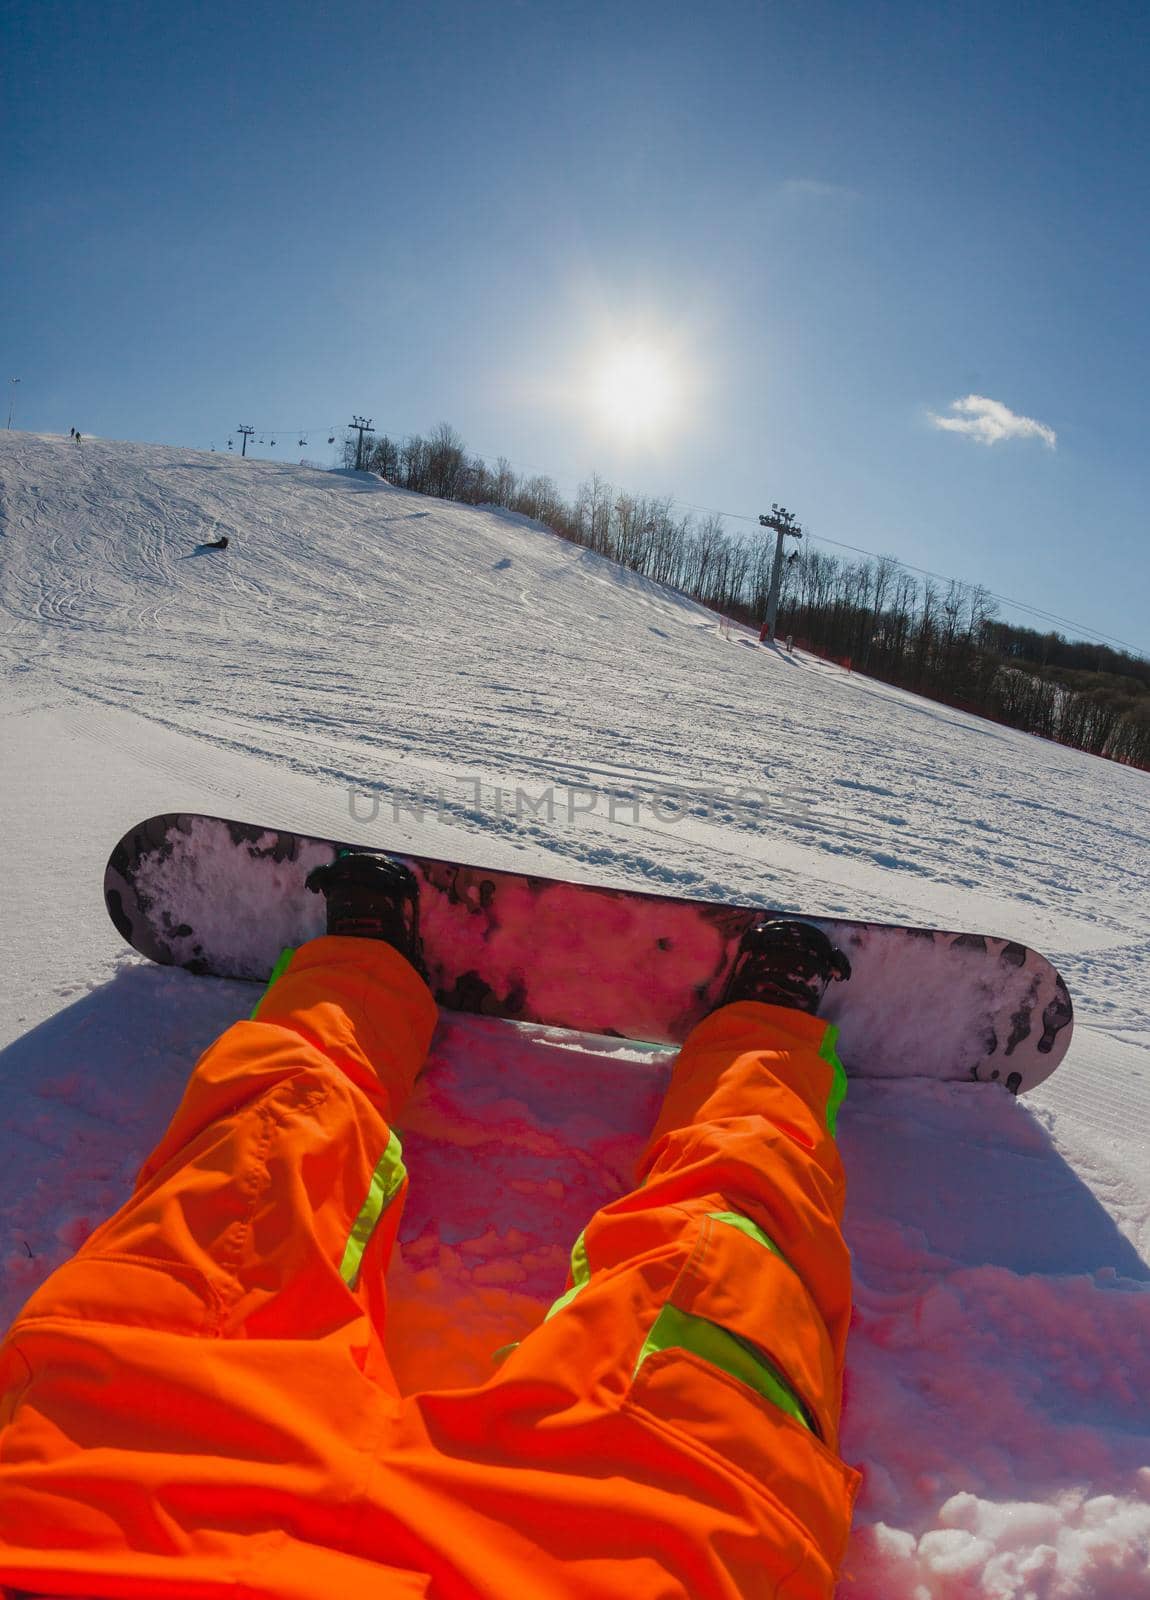 Point of view shot of a male snowboarder sitting on the snow on the slope relaxing after riding